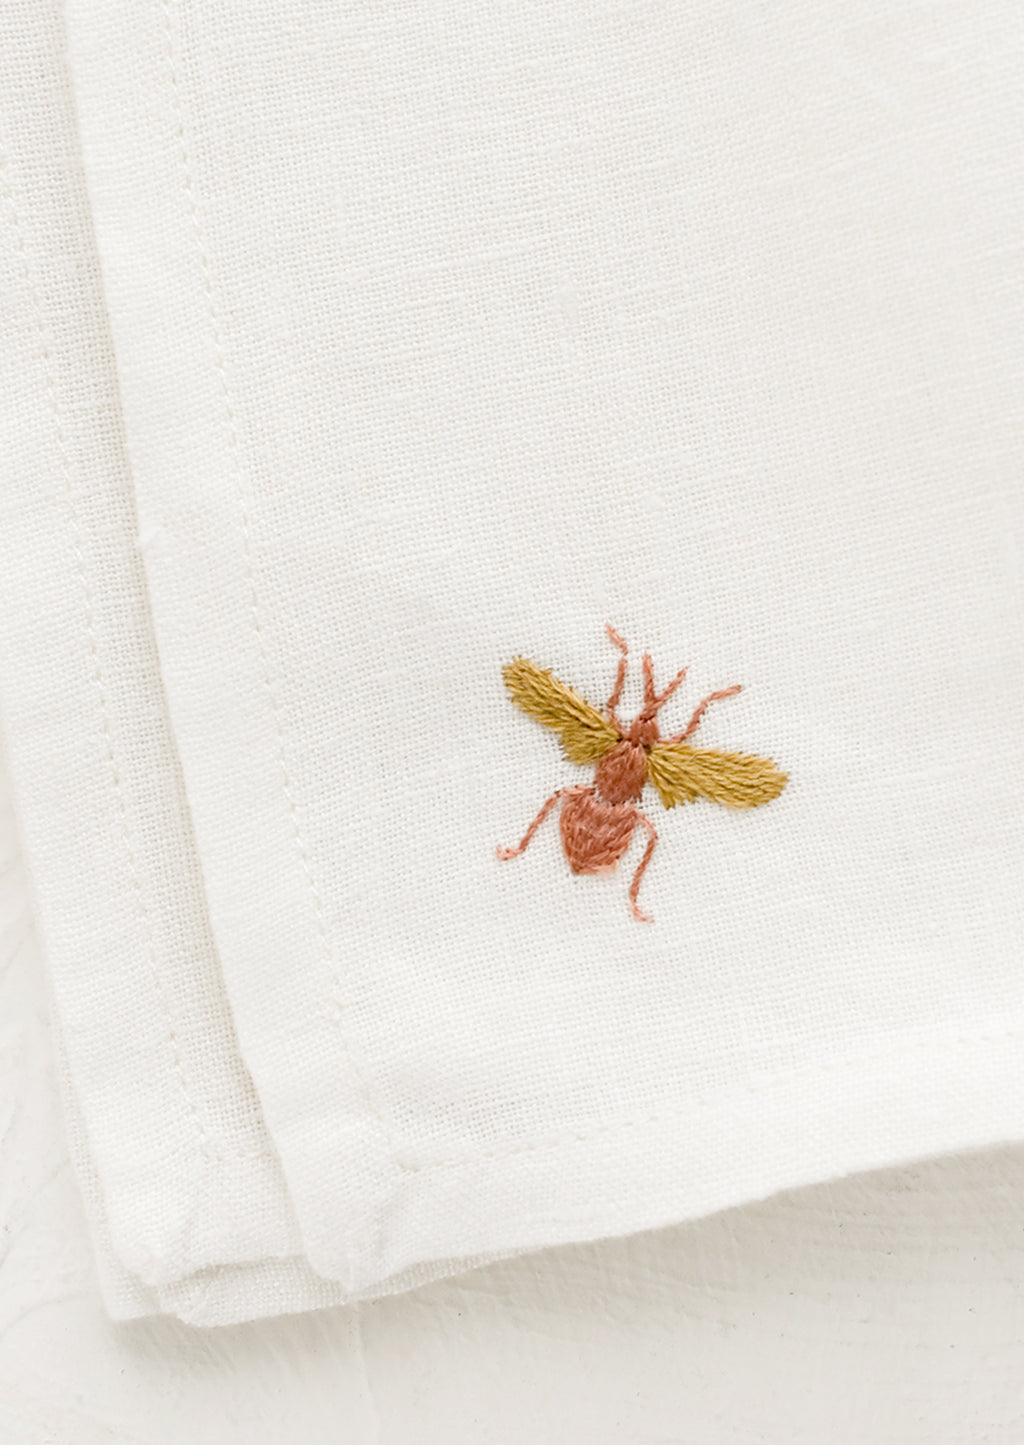 2: Embroidered bee on white linen.